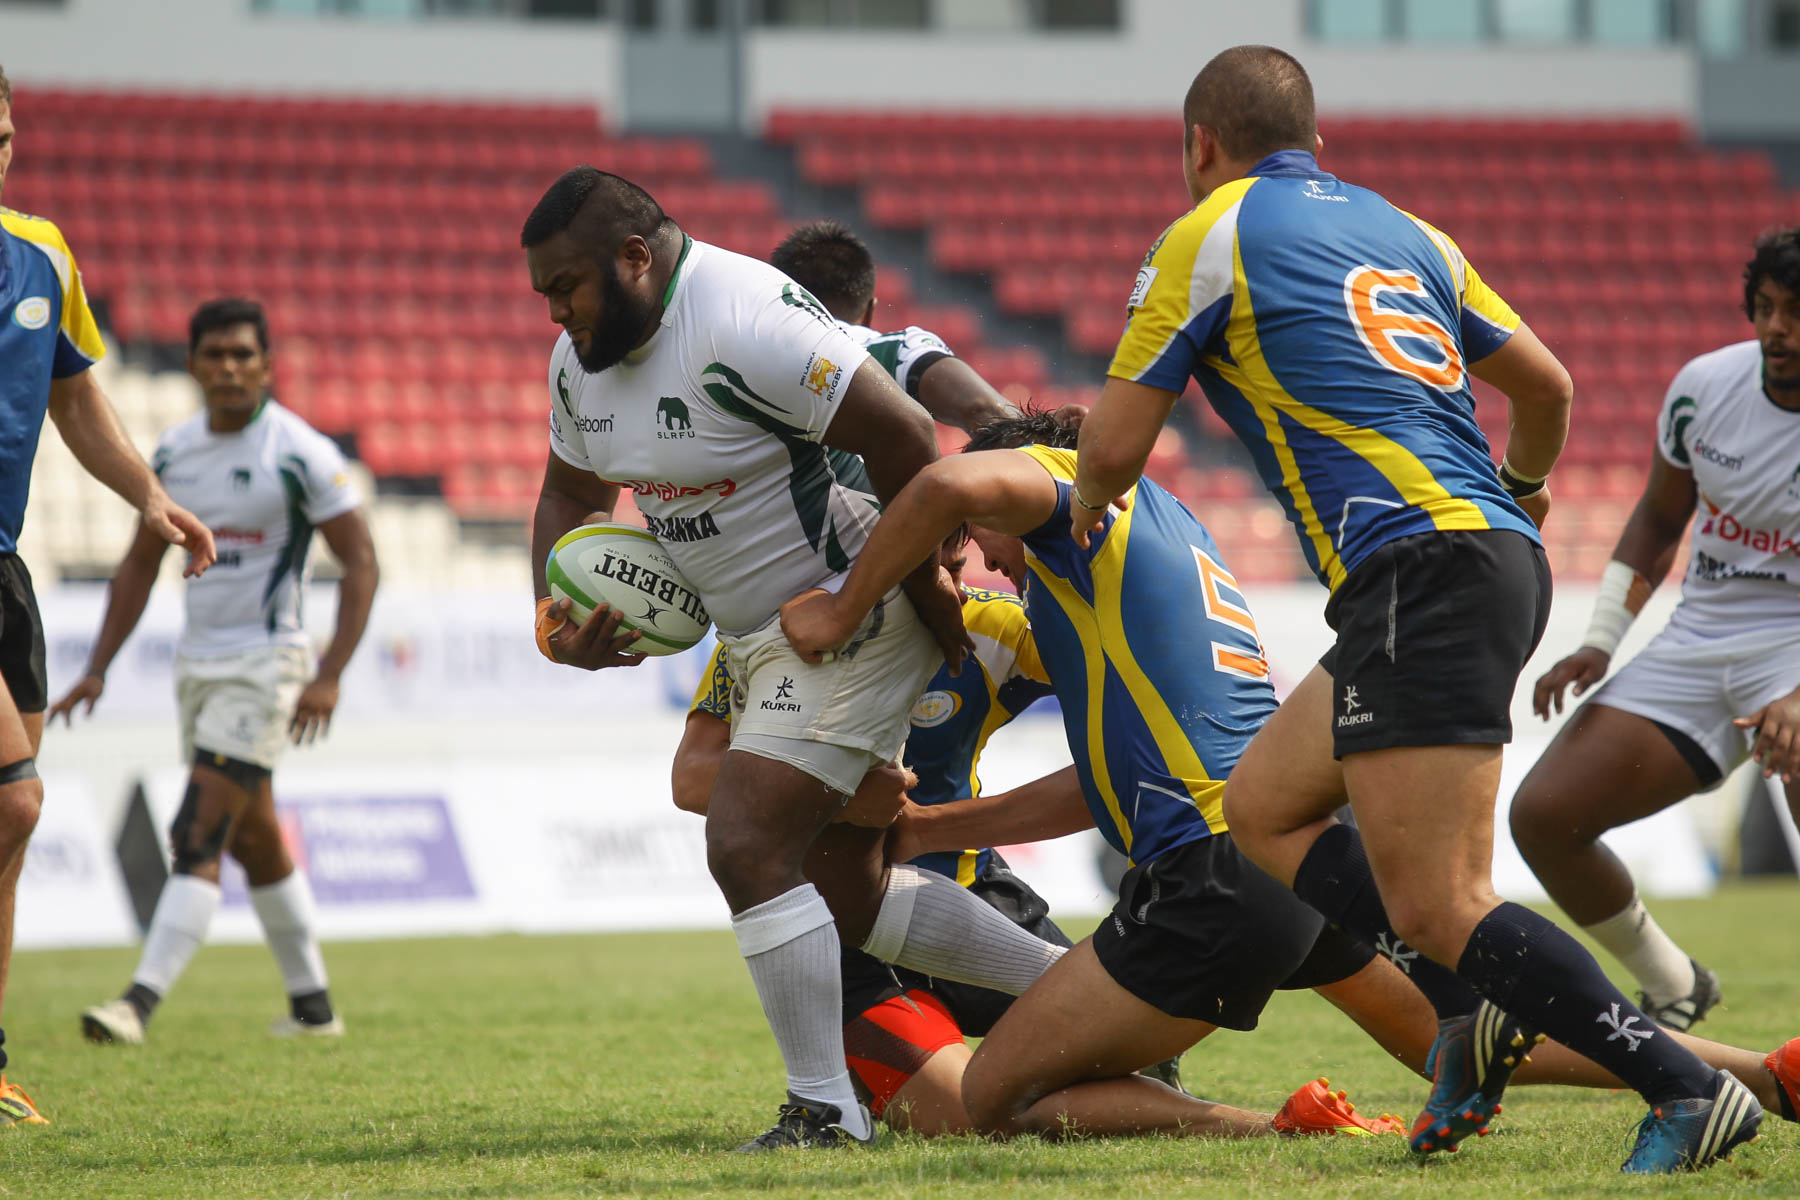 Asia Rugby Sevens Standings - Sri Lanka stagnated 